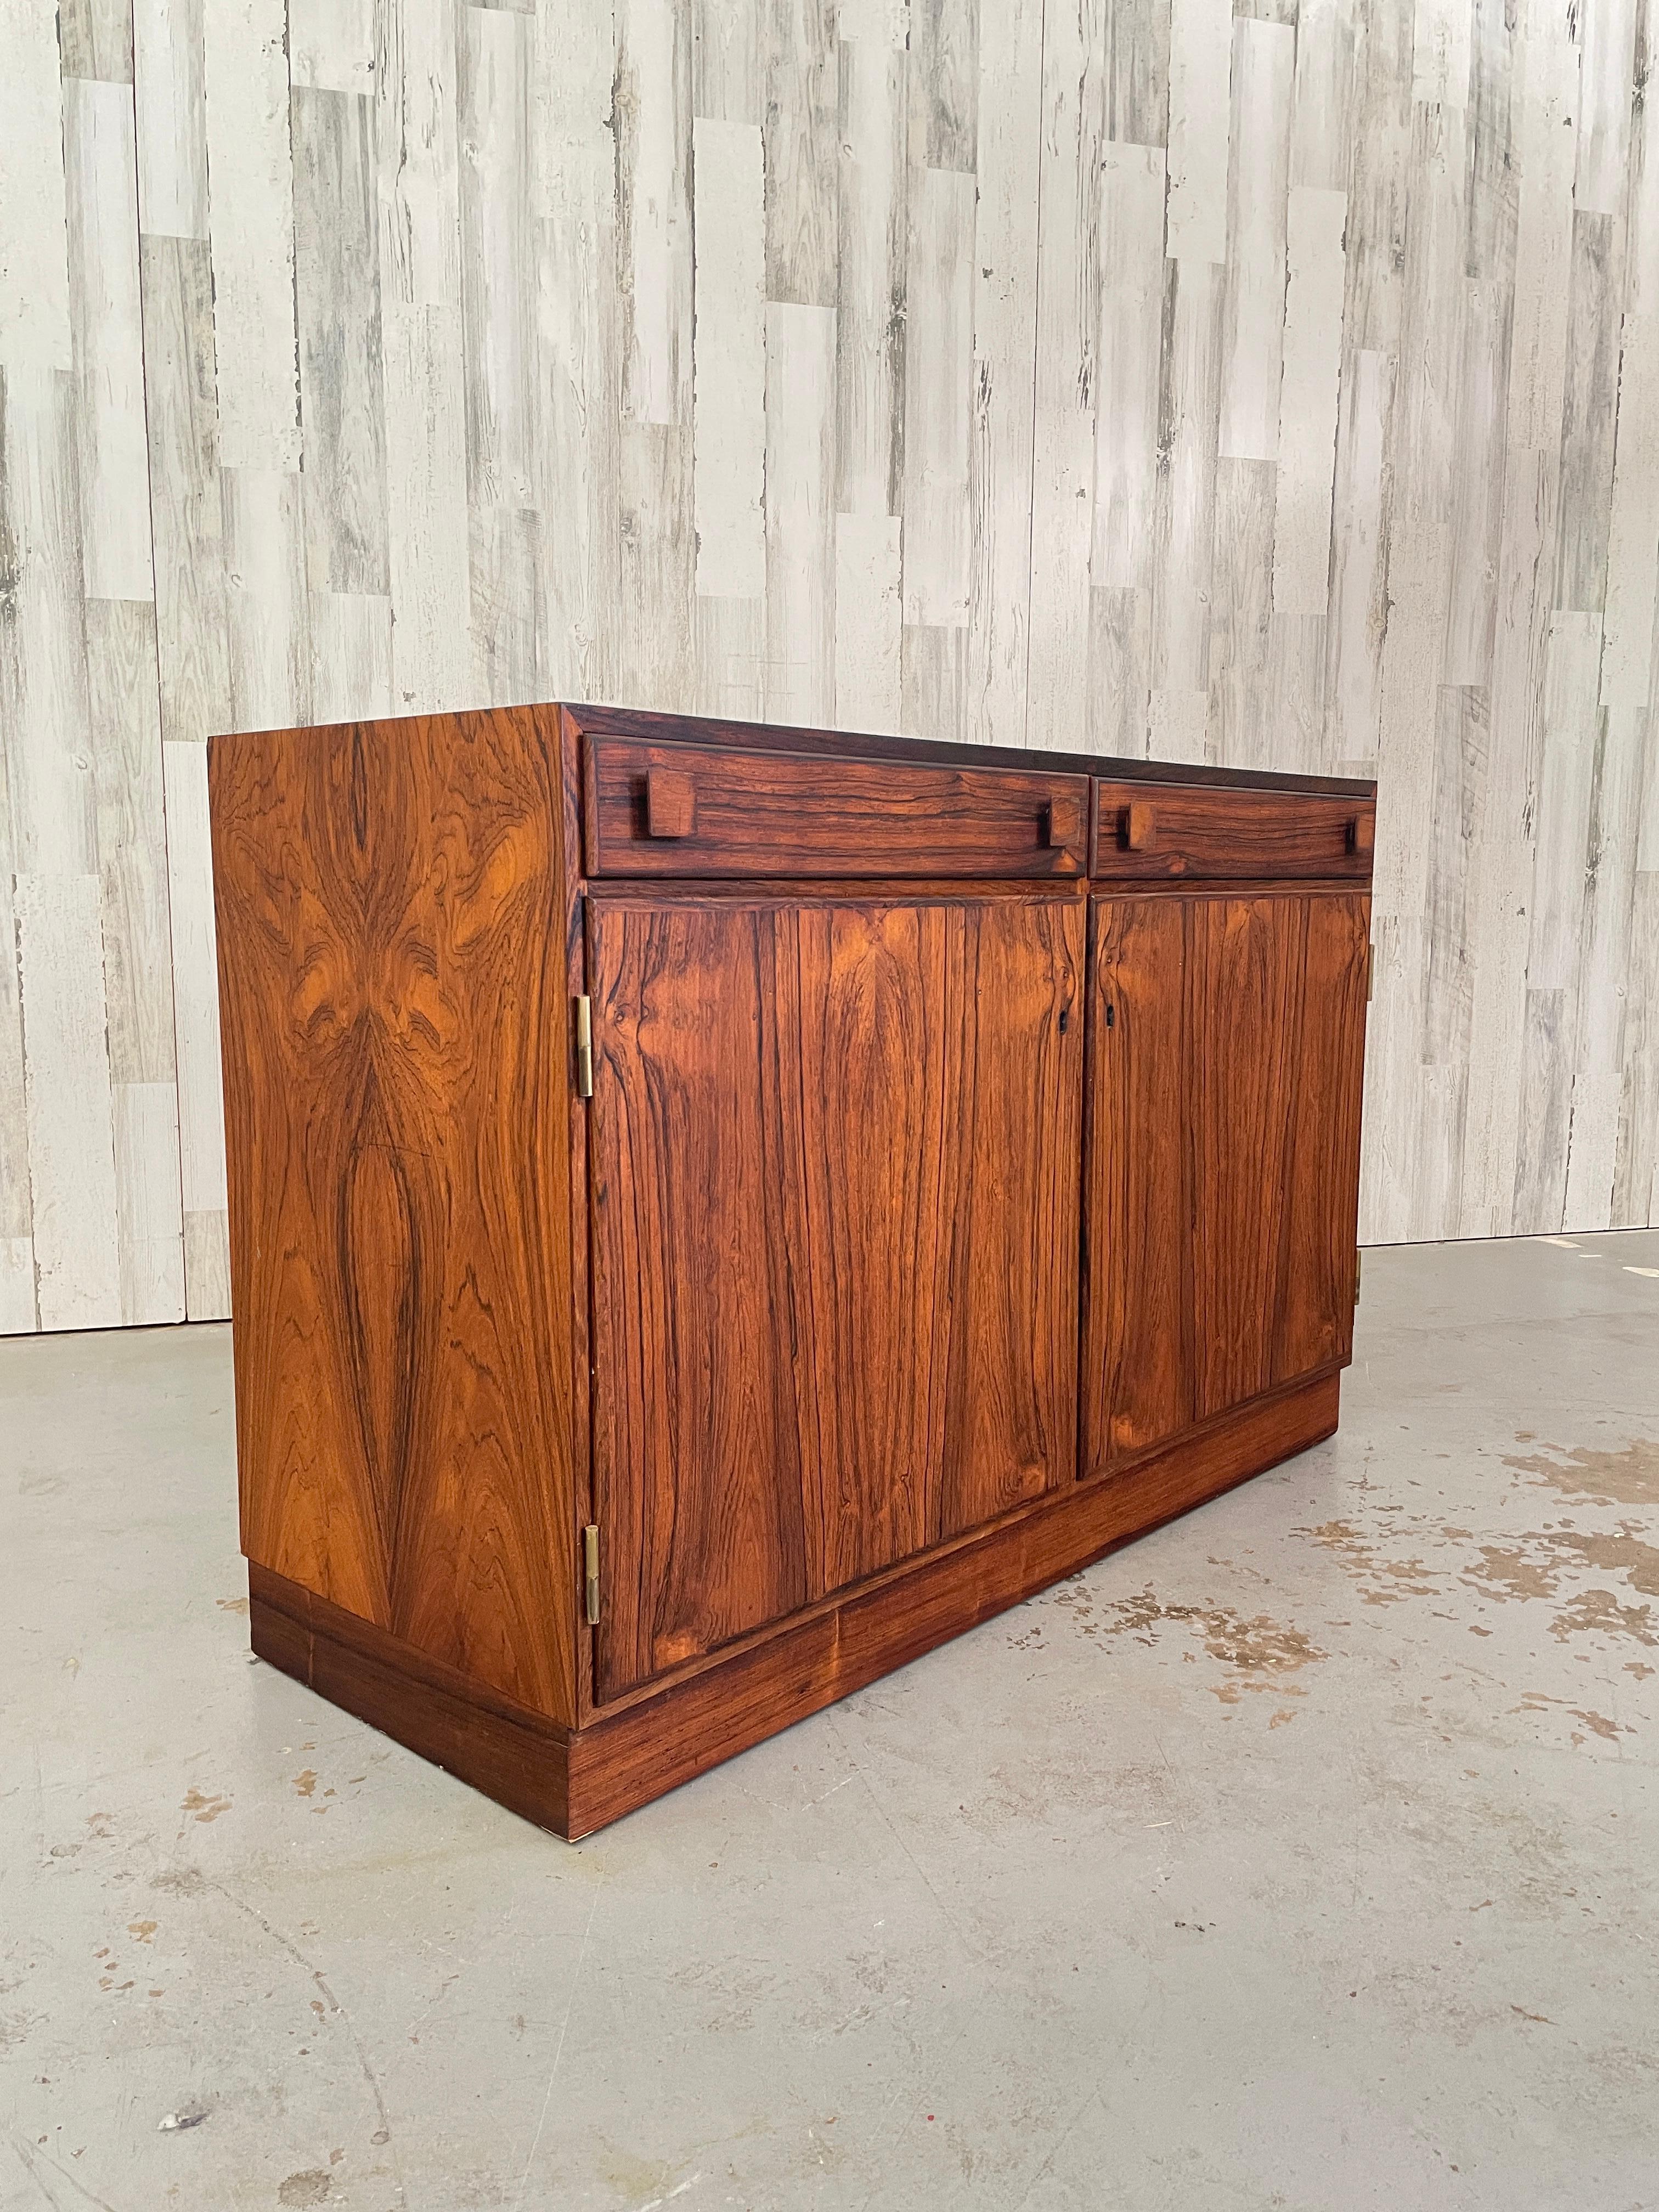 Petit rosewood Danish Modern cabinet with two drawers over two doors perfect for entry way.